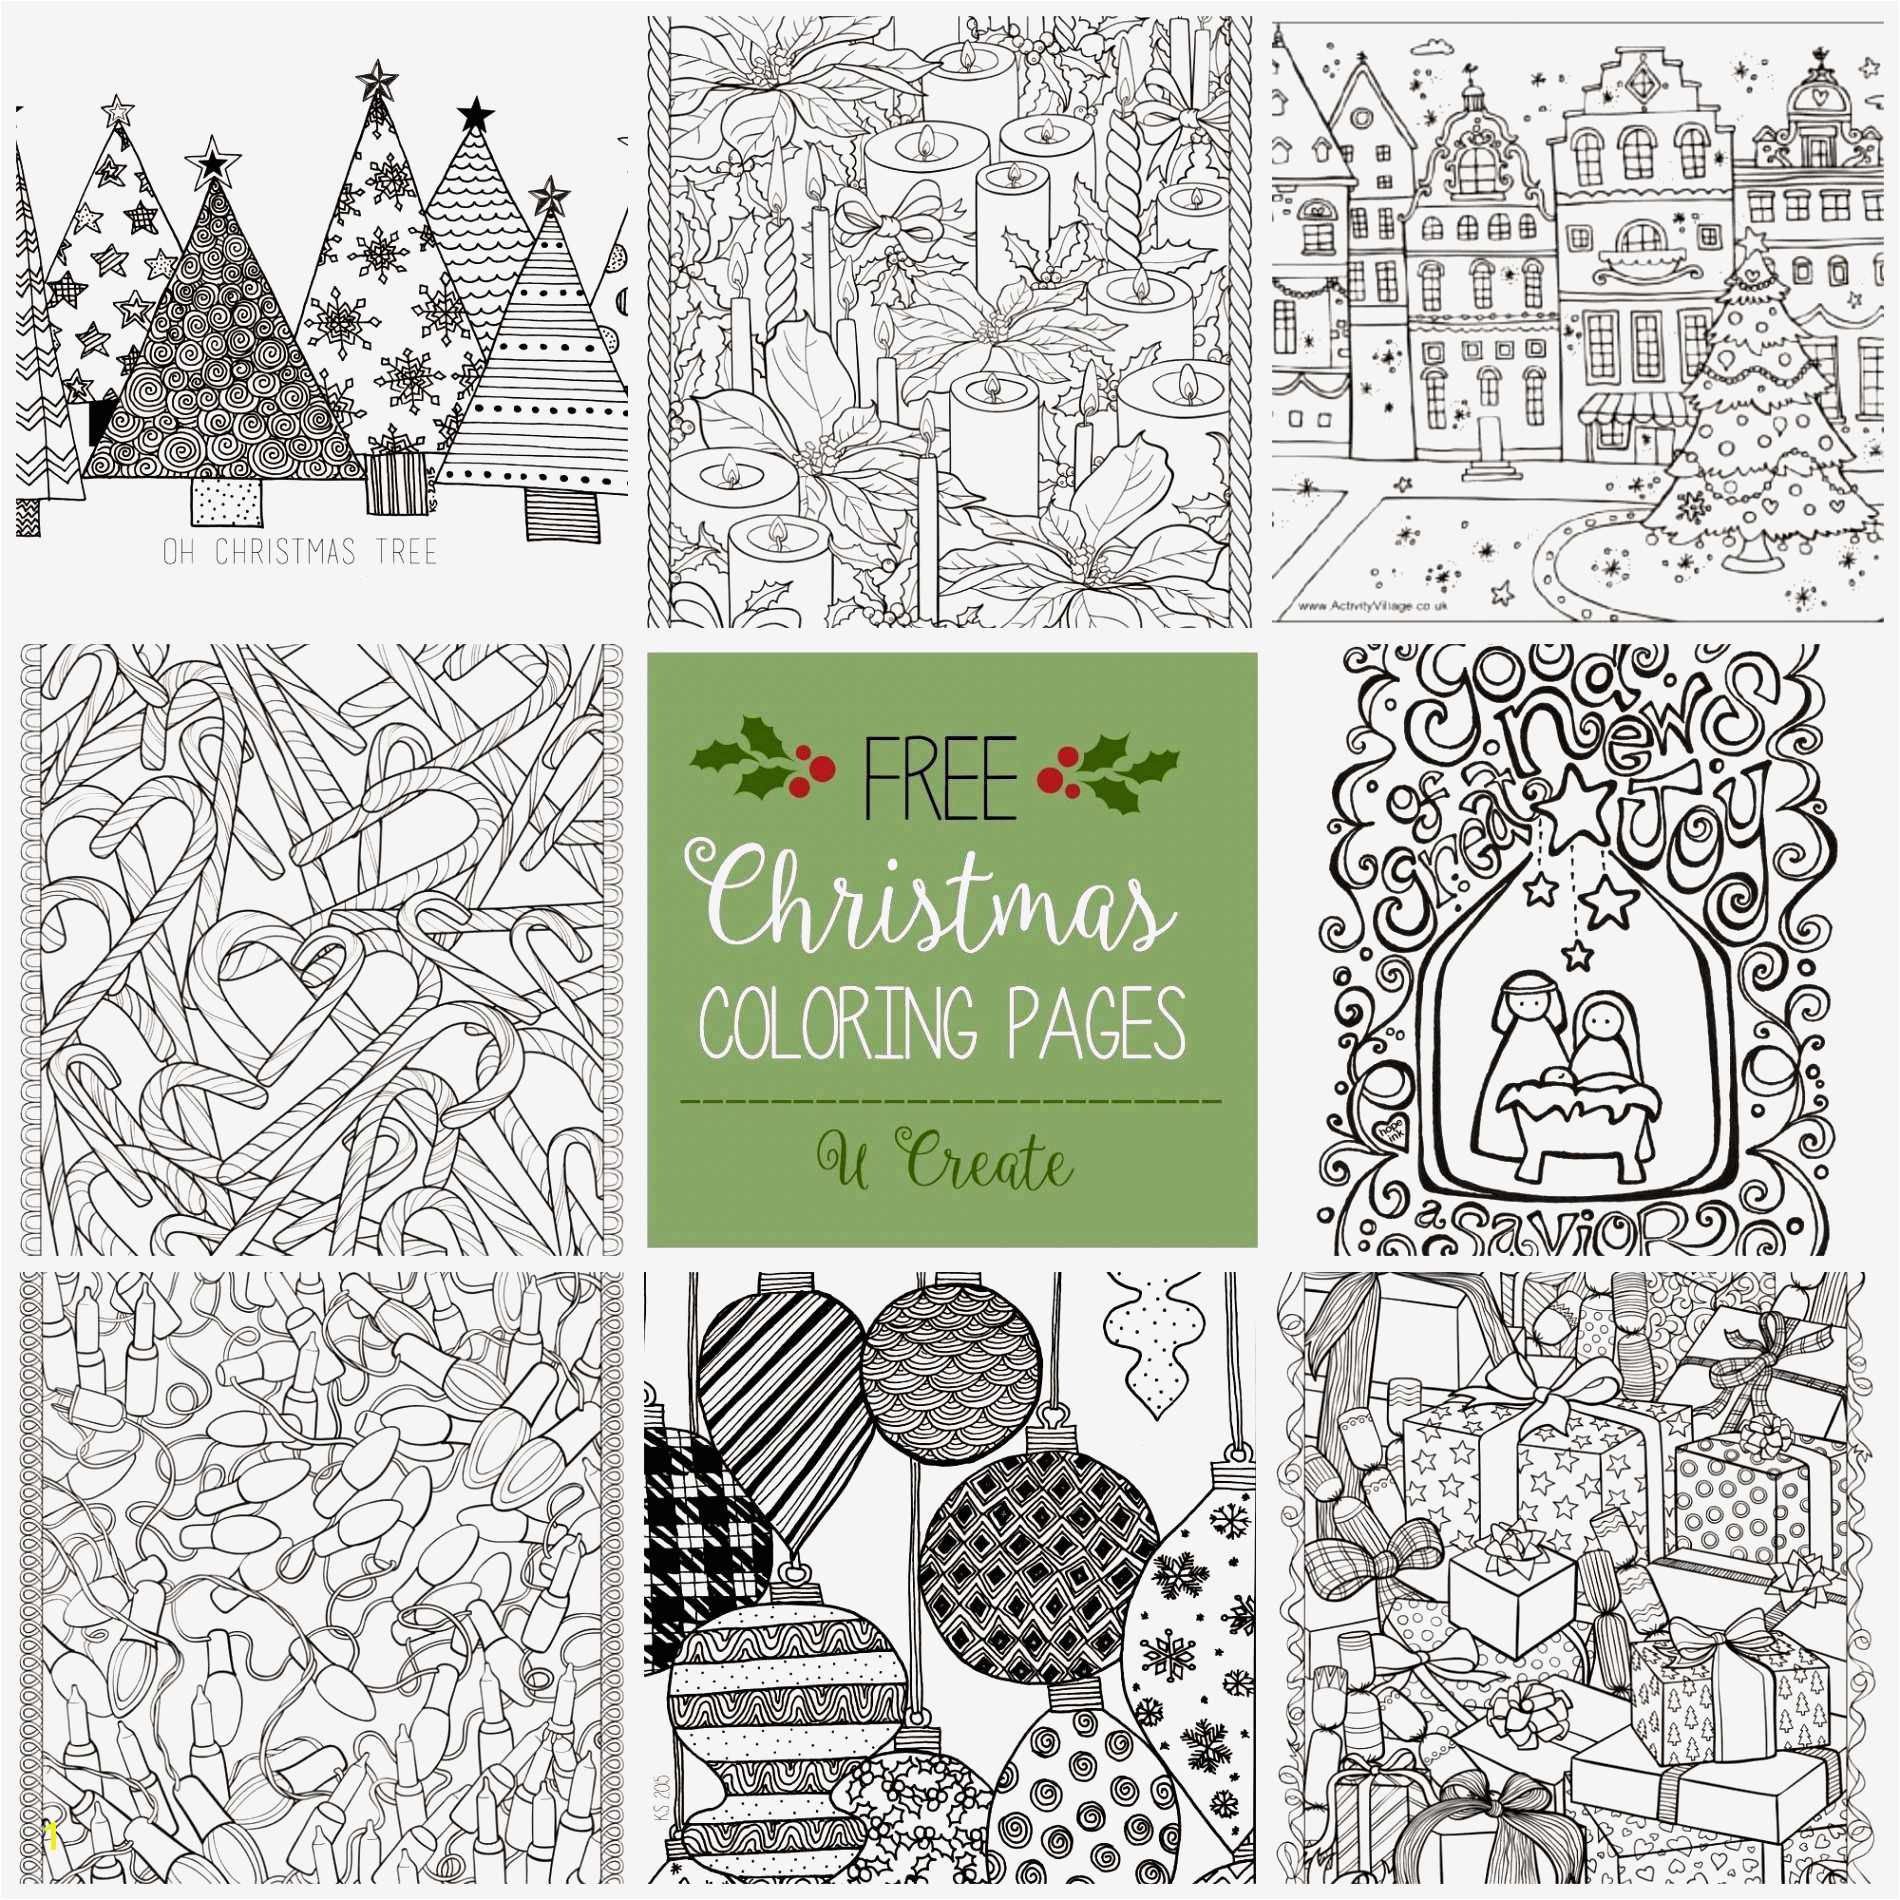 Free Printable Christmas Coloring Pages Candy Canes Christmas Coloring Pages Adults Cool Gallery Free Coloring Pages